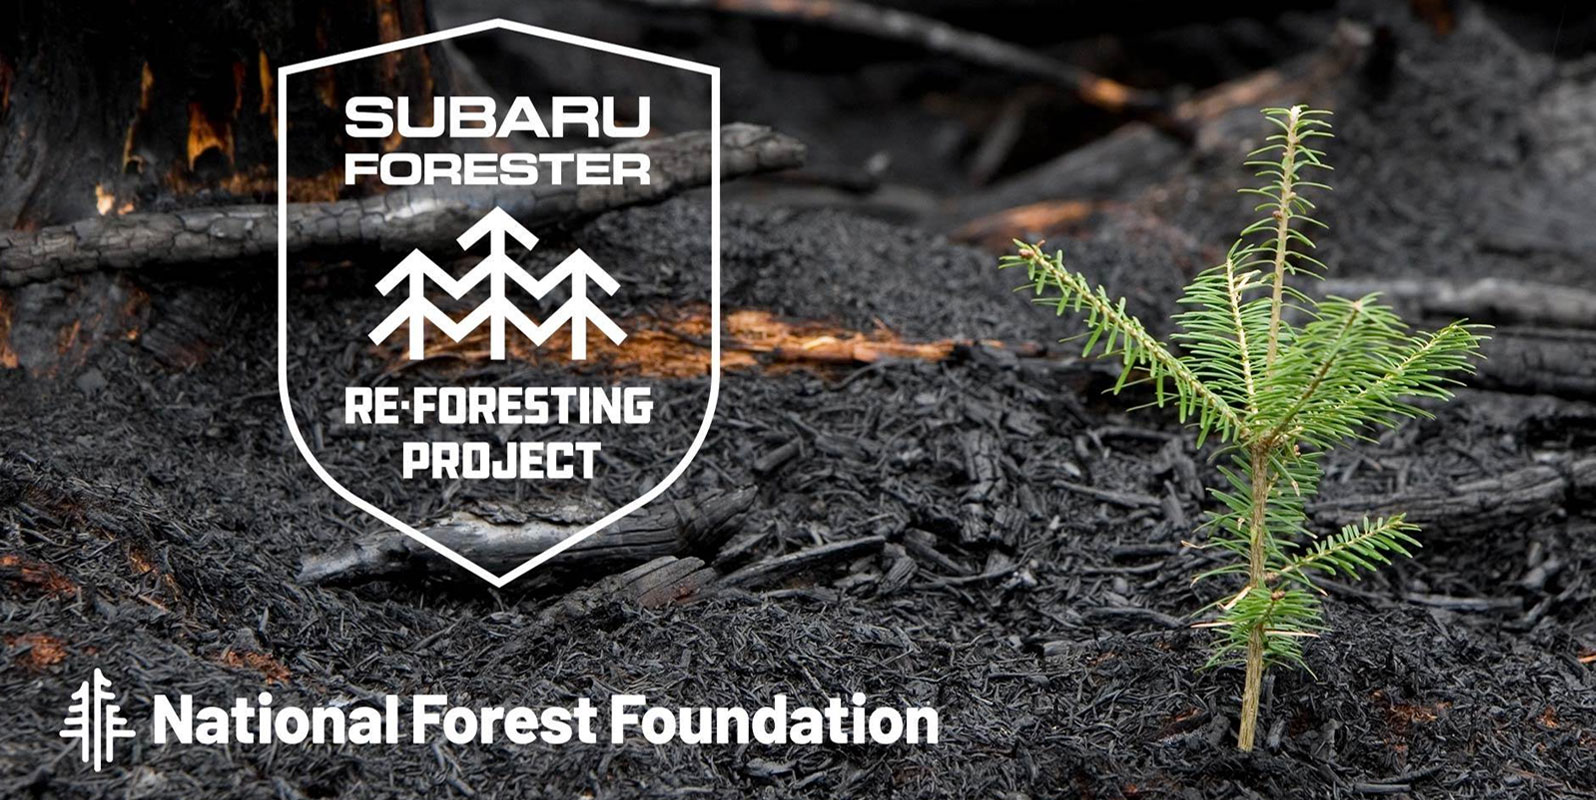 Subaru and National Forest Foundation